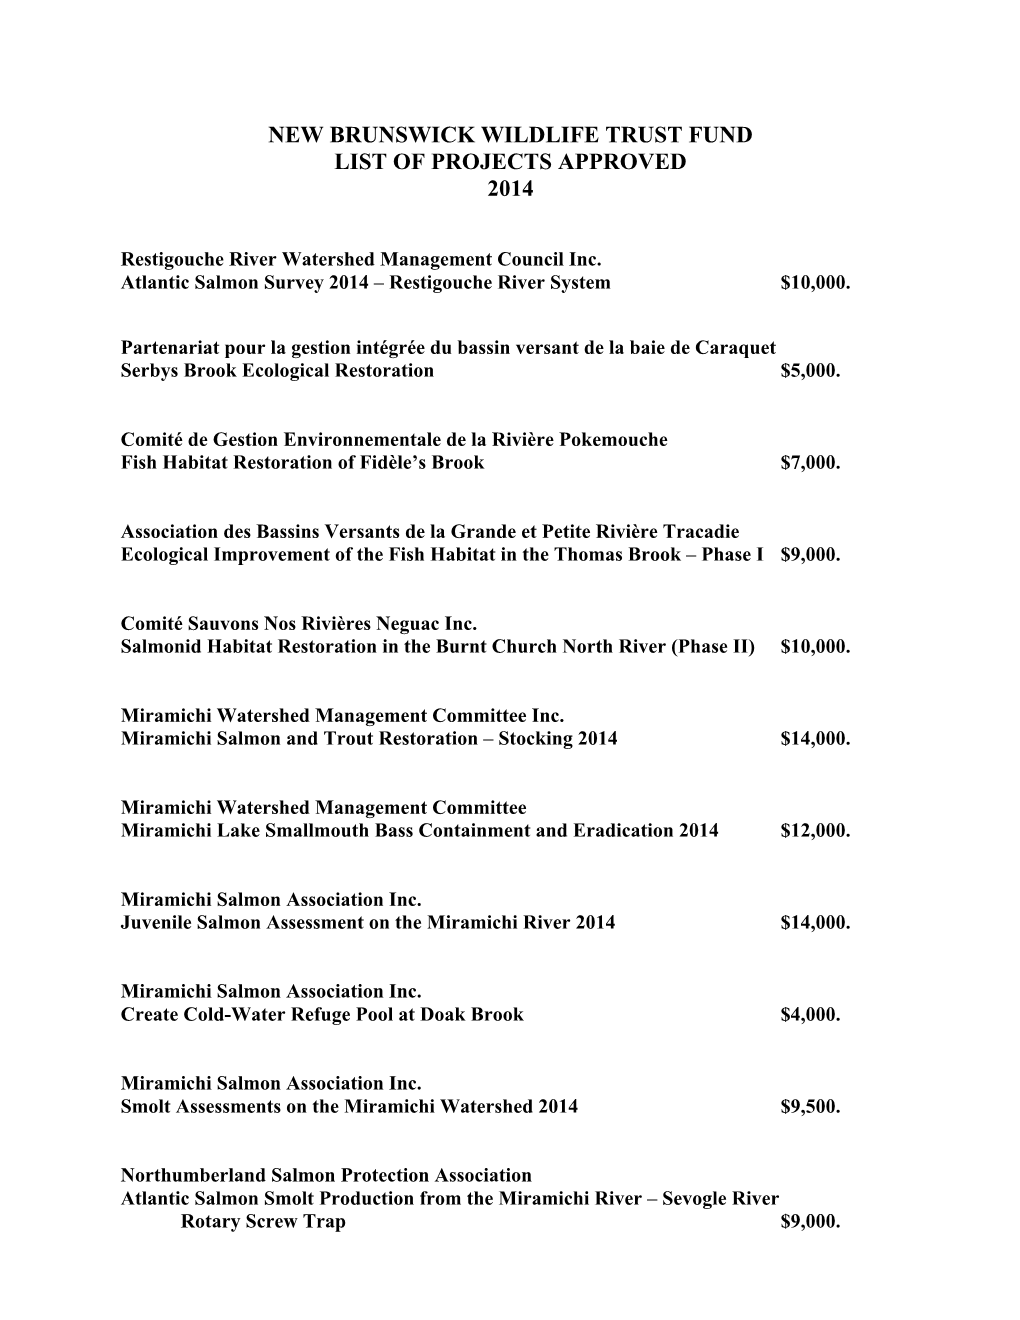 List of Projects Approved 2014